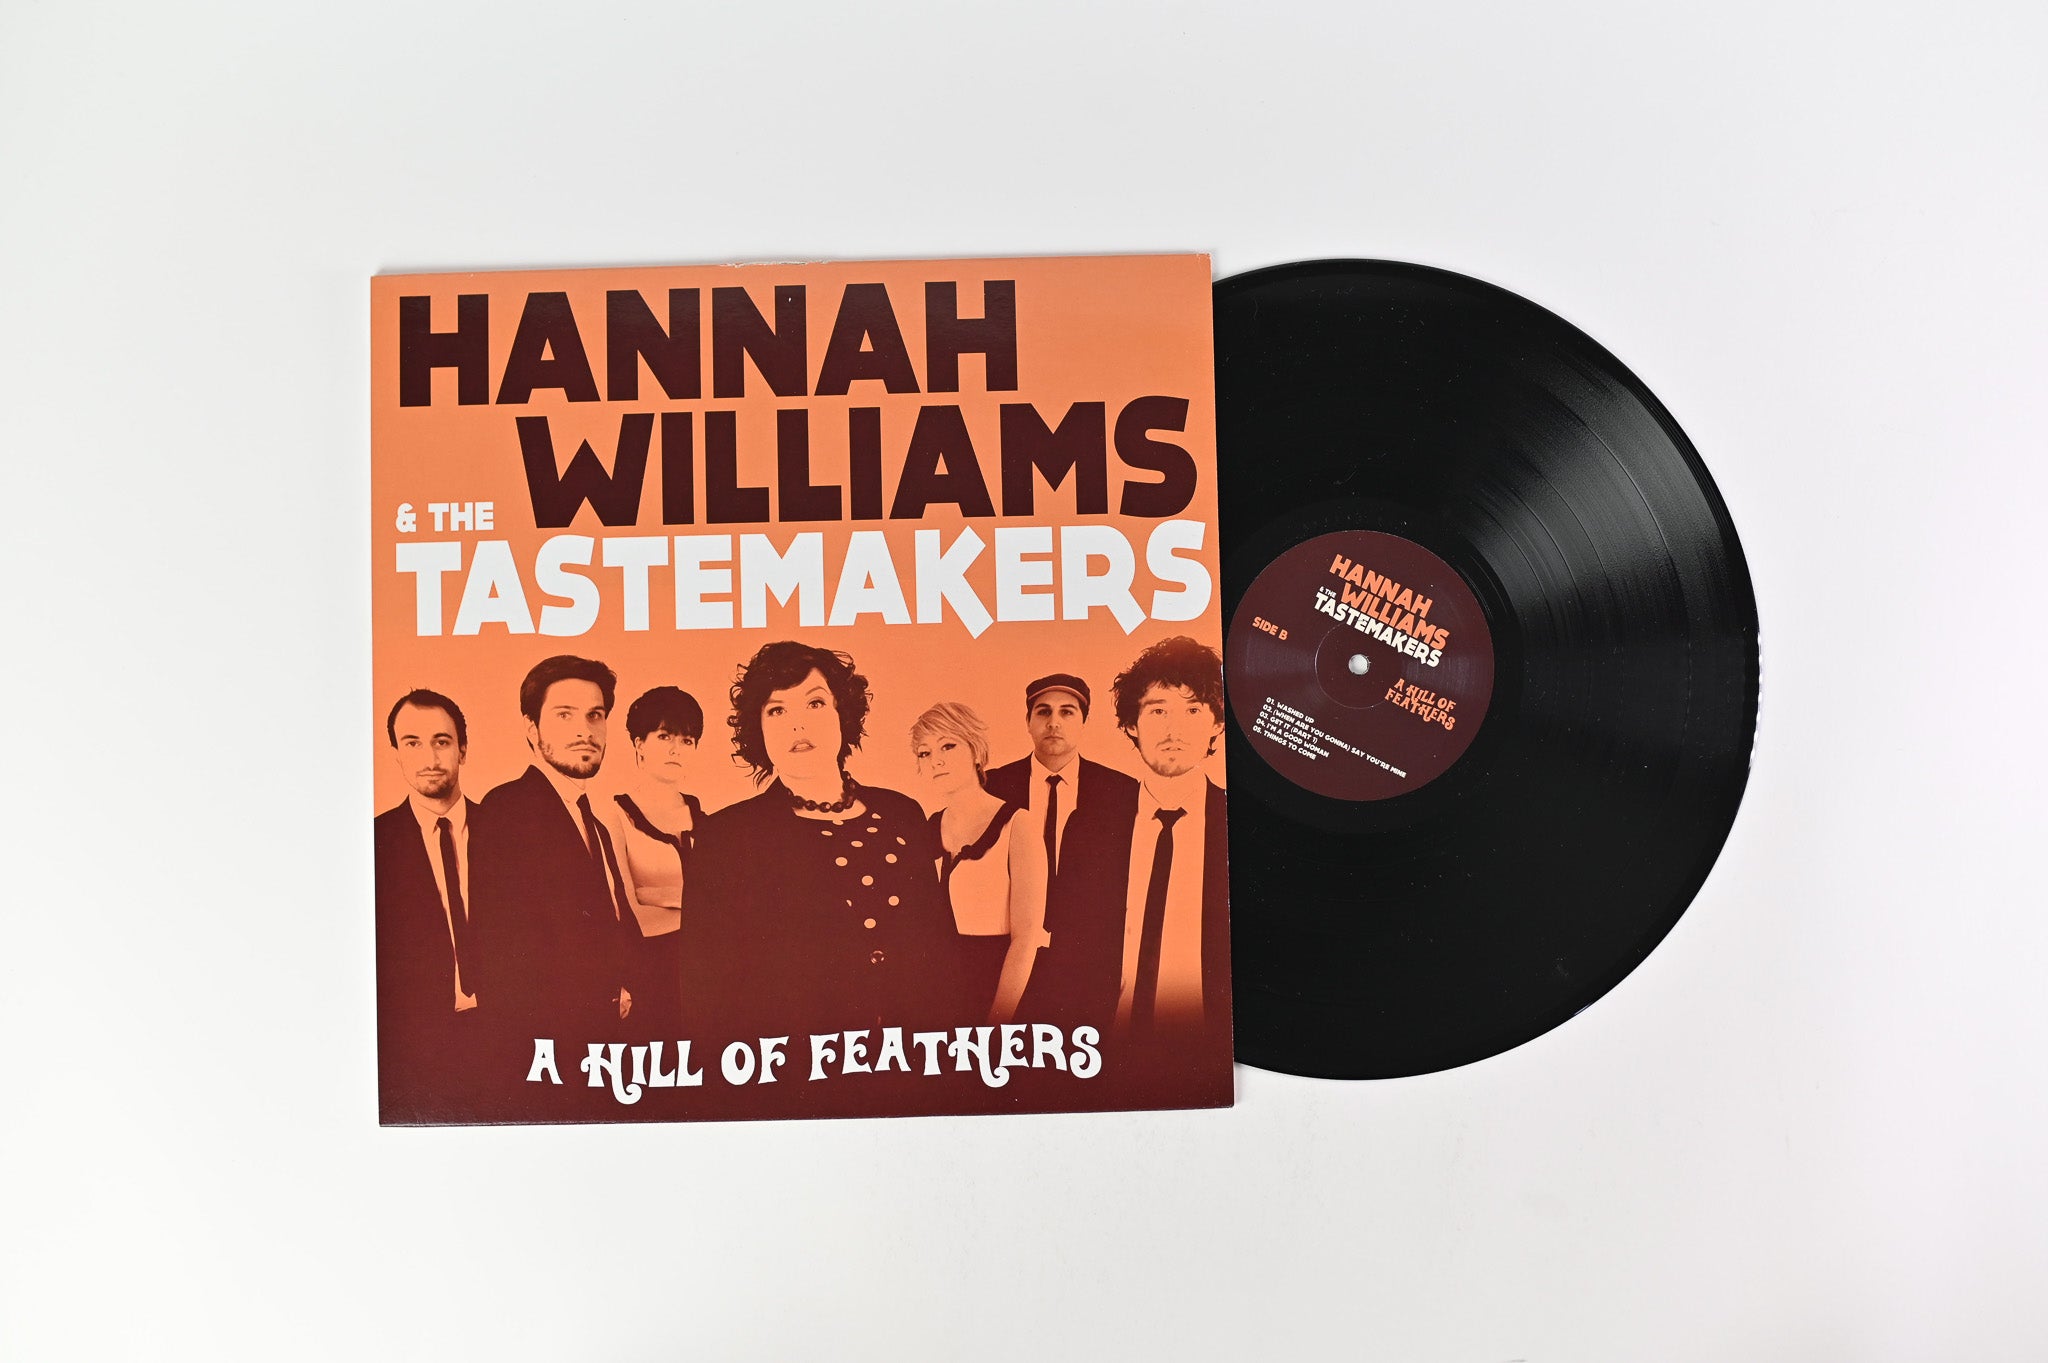 Hannah Williams & The Tastemakers - A Hill Of Feathers on Record Kicks